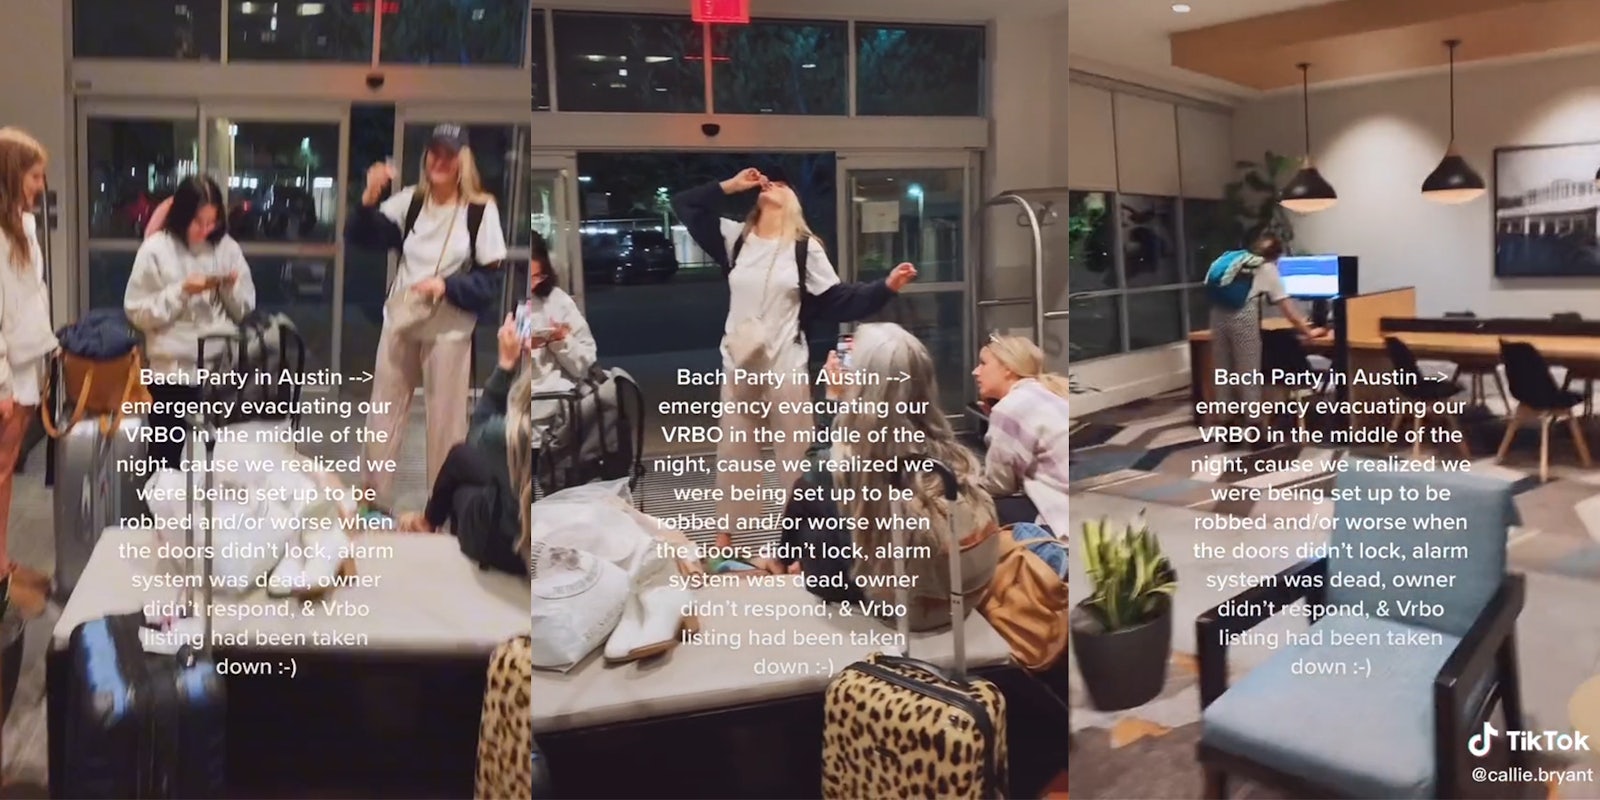 people gathered in lobby with caption 'Bach Party in Austin emergency evacuating our VRBO in the middle of the night cause we realized we were being set up to be robbed and/or worse when the doors didn't lock, alarm didn't respond, and Vrbo listing had been taken down :-)'